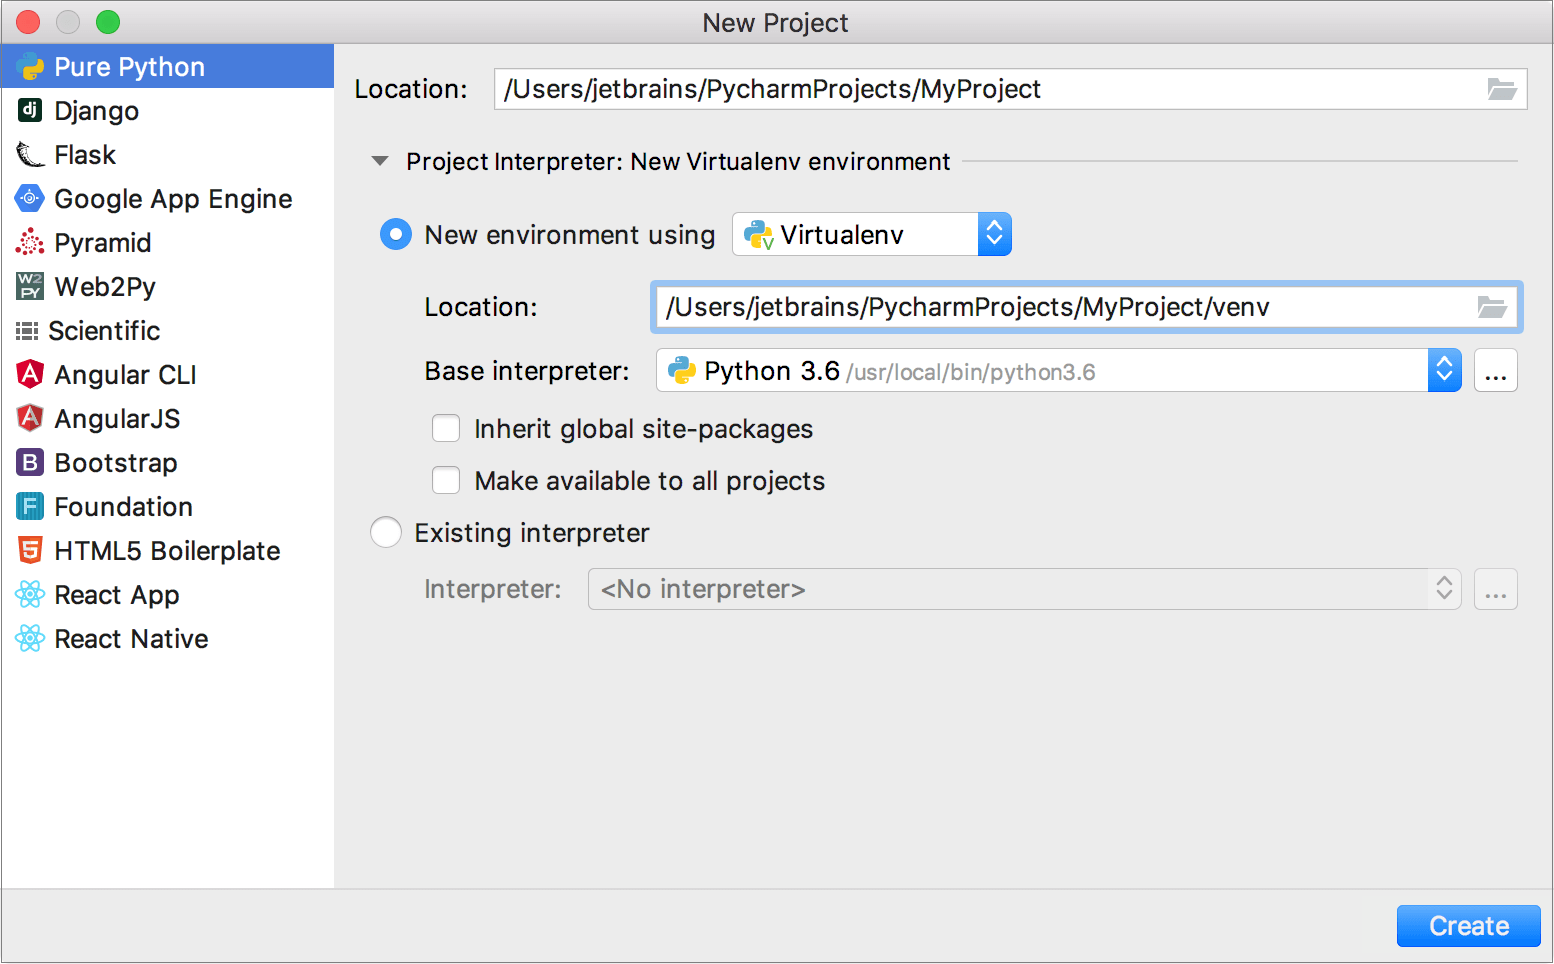 Creating a PyCharm helps implement new project